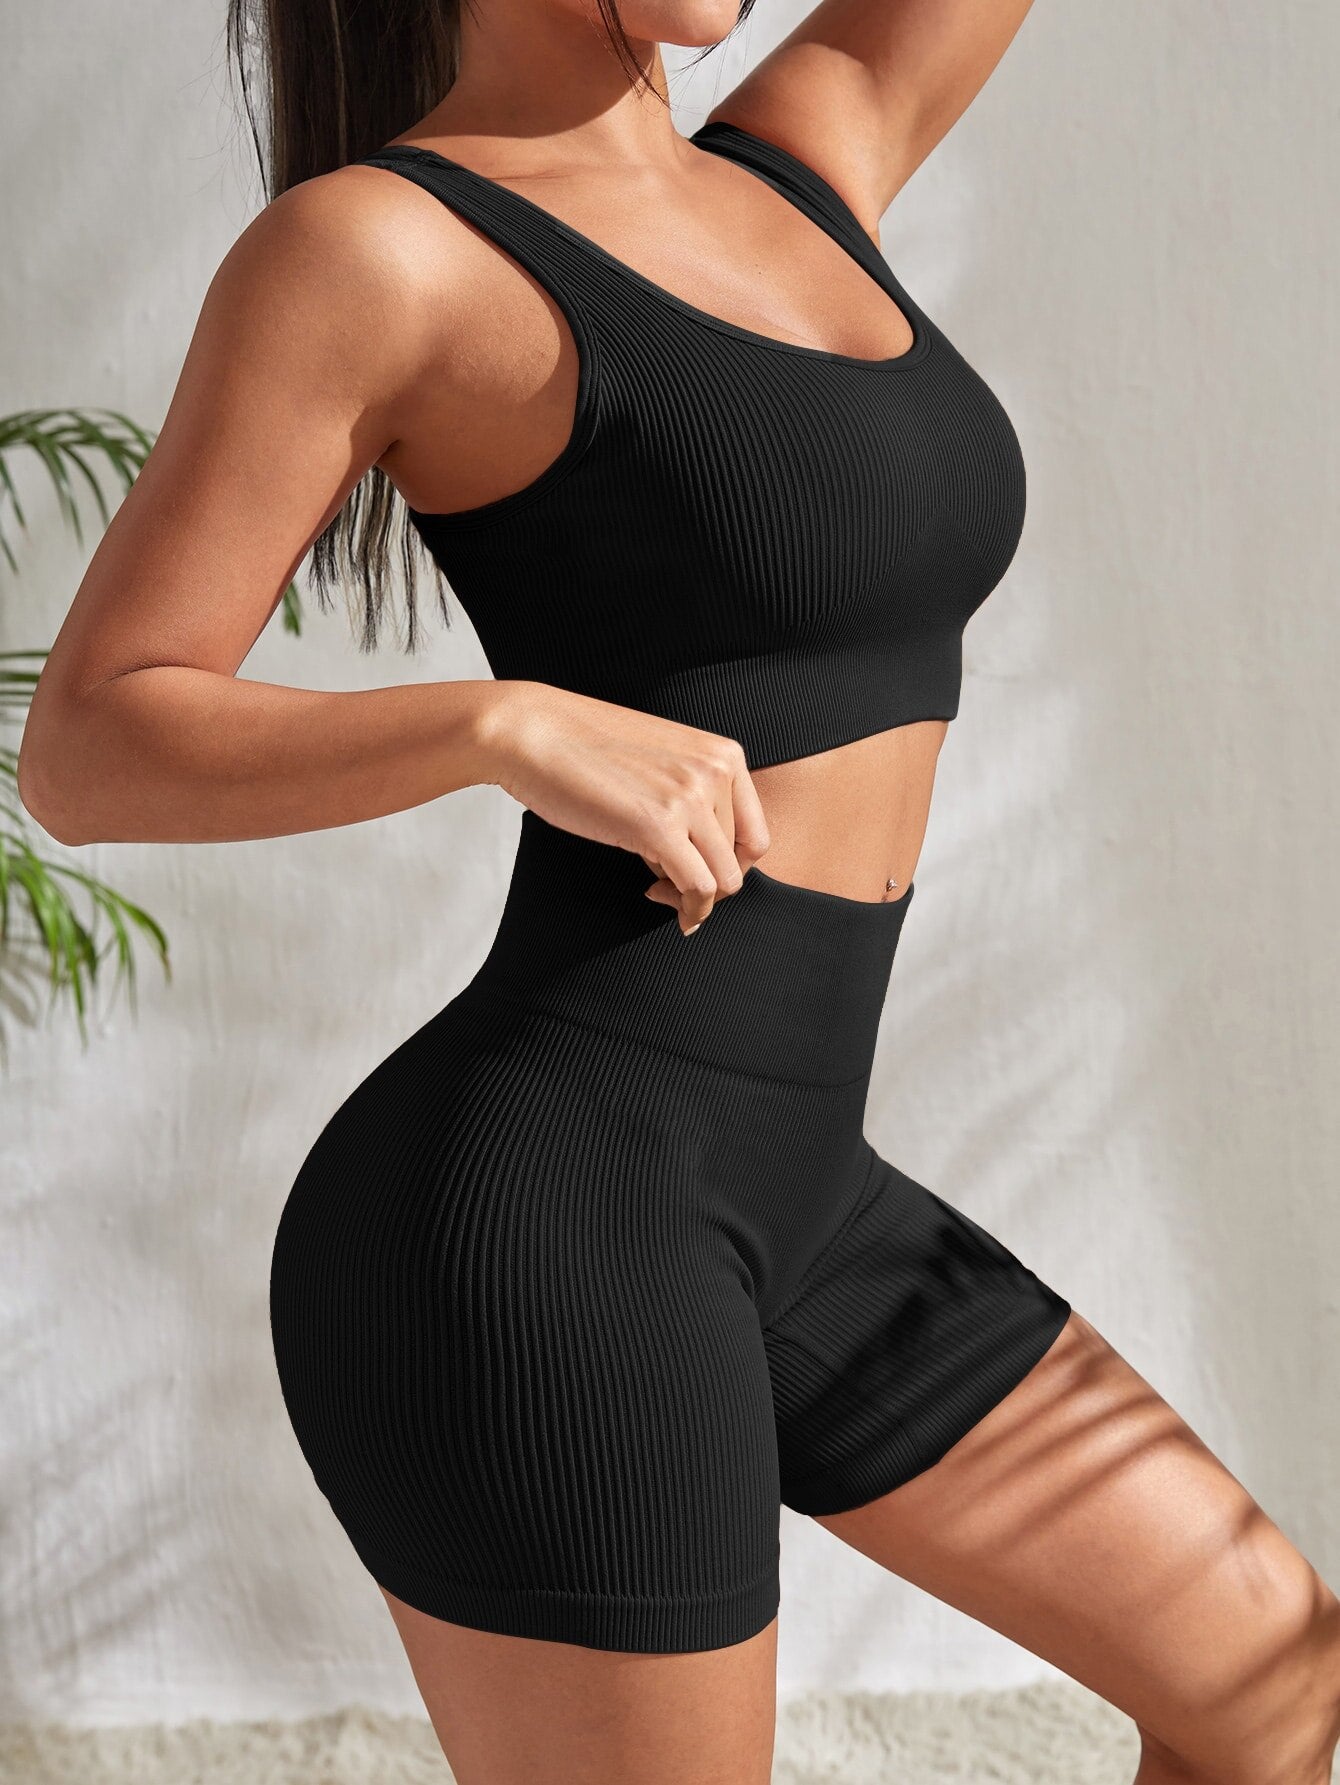 Women's Seamless Gym Suits Black